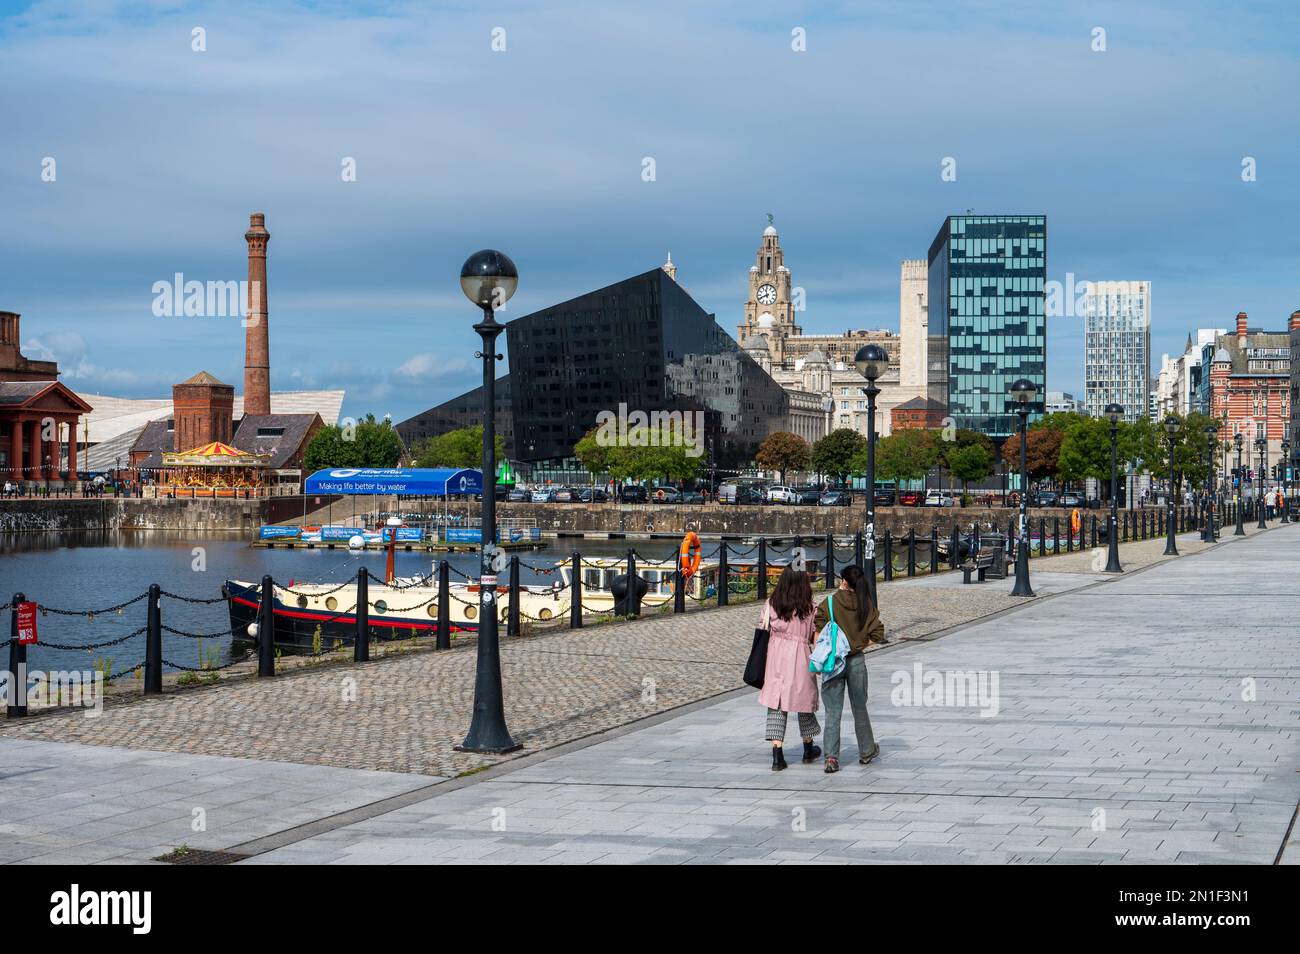 The Albert Dock and the Pier Head Building, Liverpool, Merseyside, Angleterre, Royaume-Uni, Europe Banque D'Images